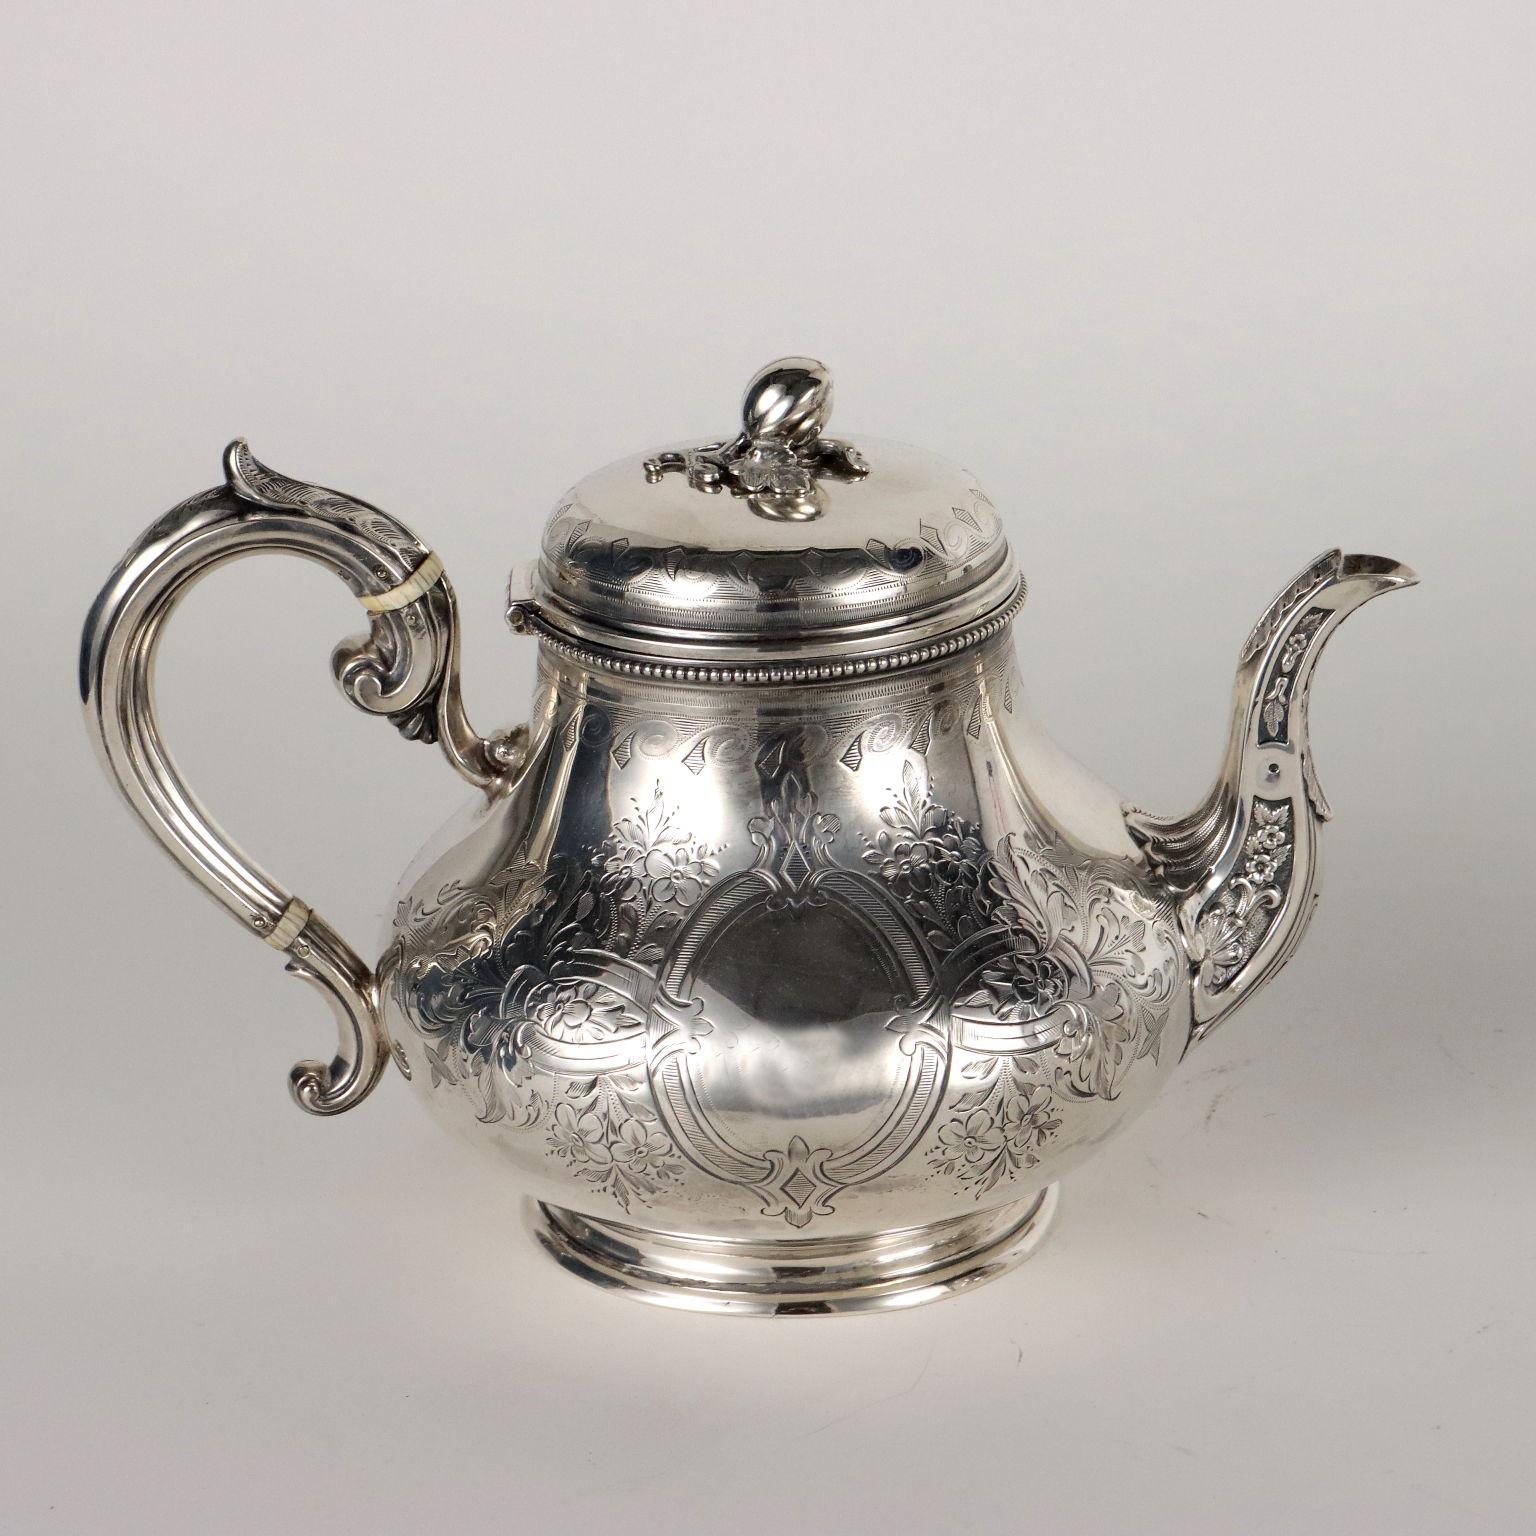 Martin Hall & Co 925 Sterling Silver Tea and Coffee Service For Sale 3